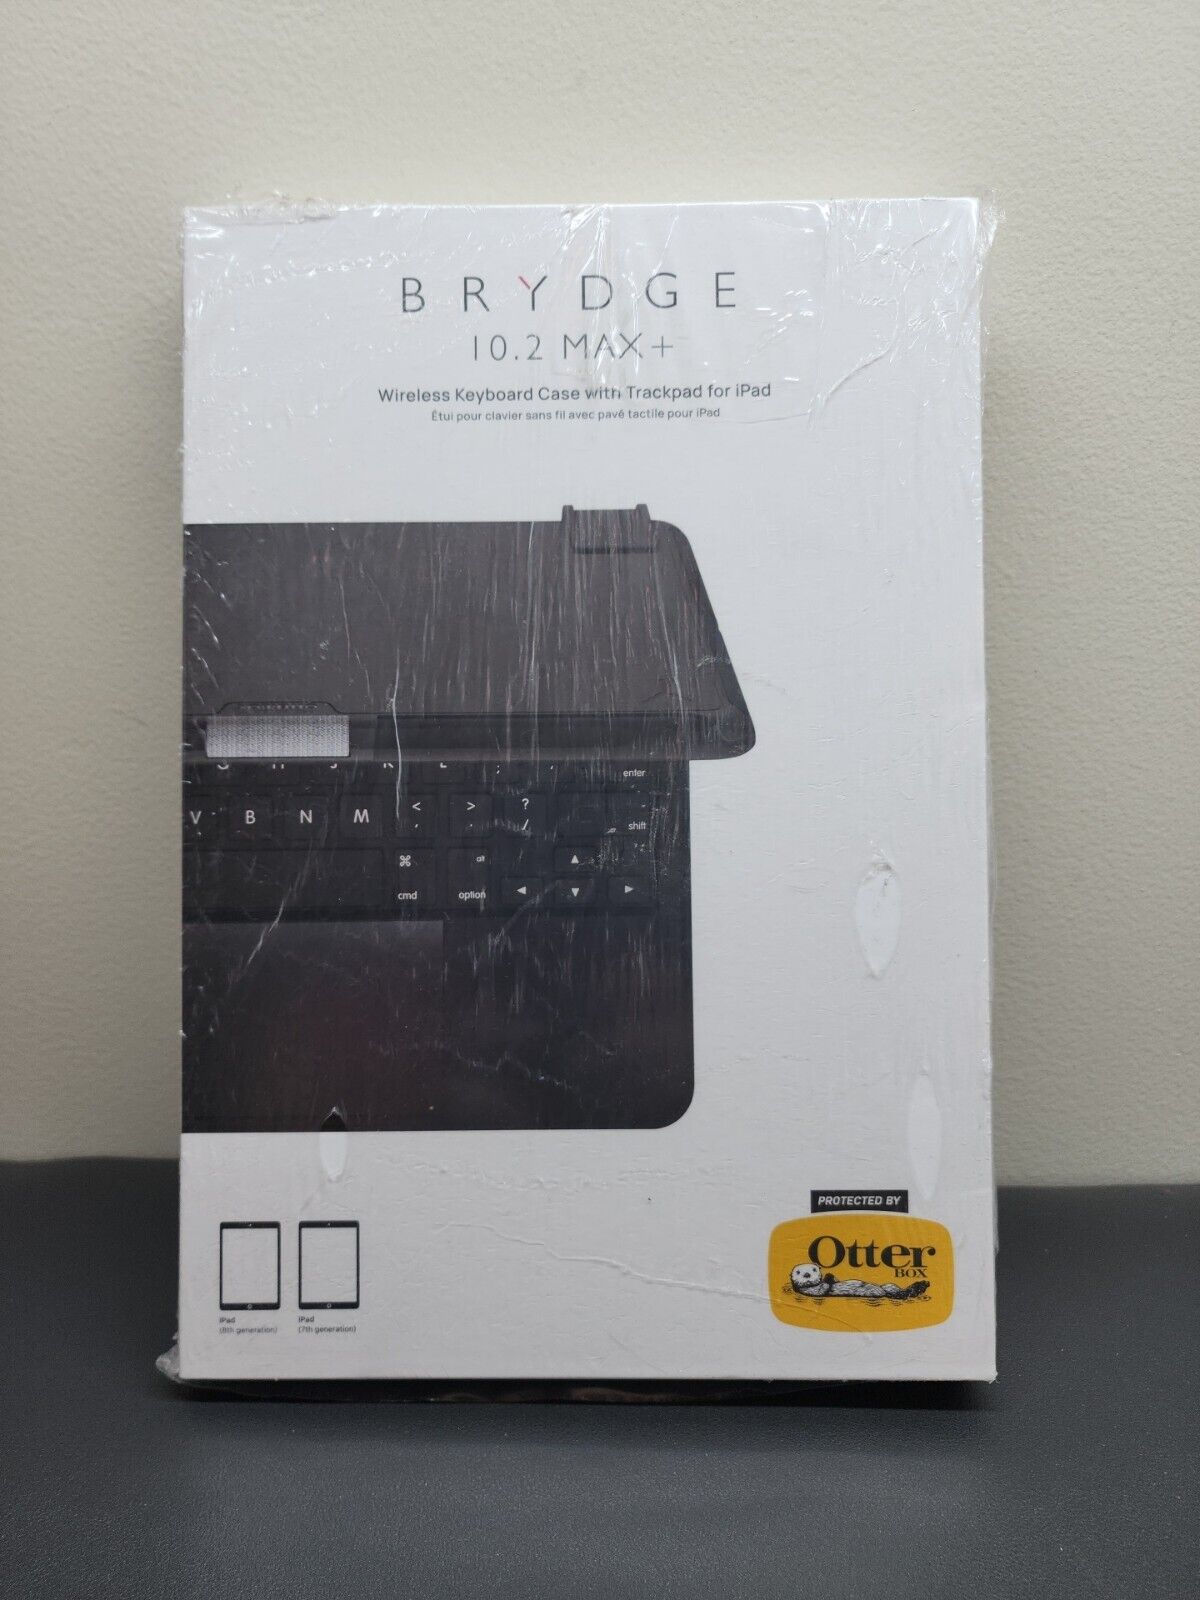 Brydge 10.2 MAX+ Wireless iPad Keyboard Case with Trackpad for iPad 7th/8th Gen